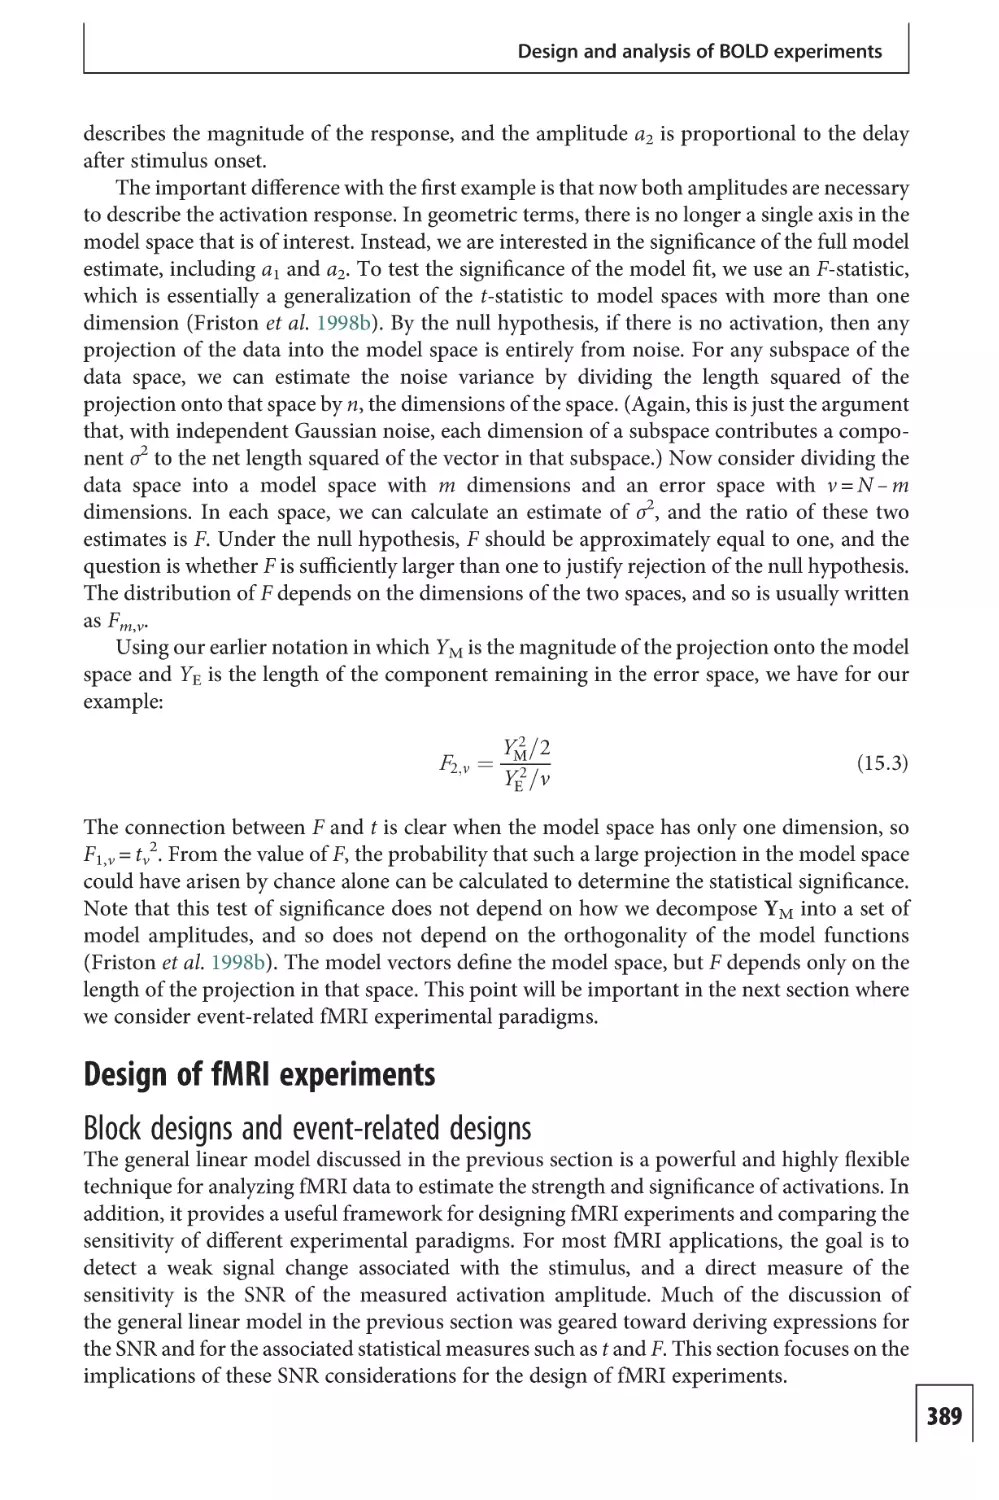 Design of fMRI experiments
Block designs and event-related designs